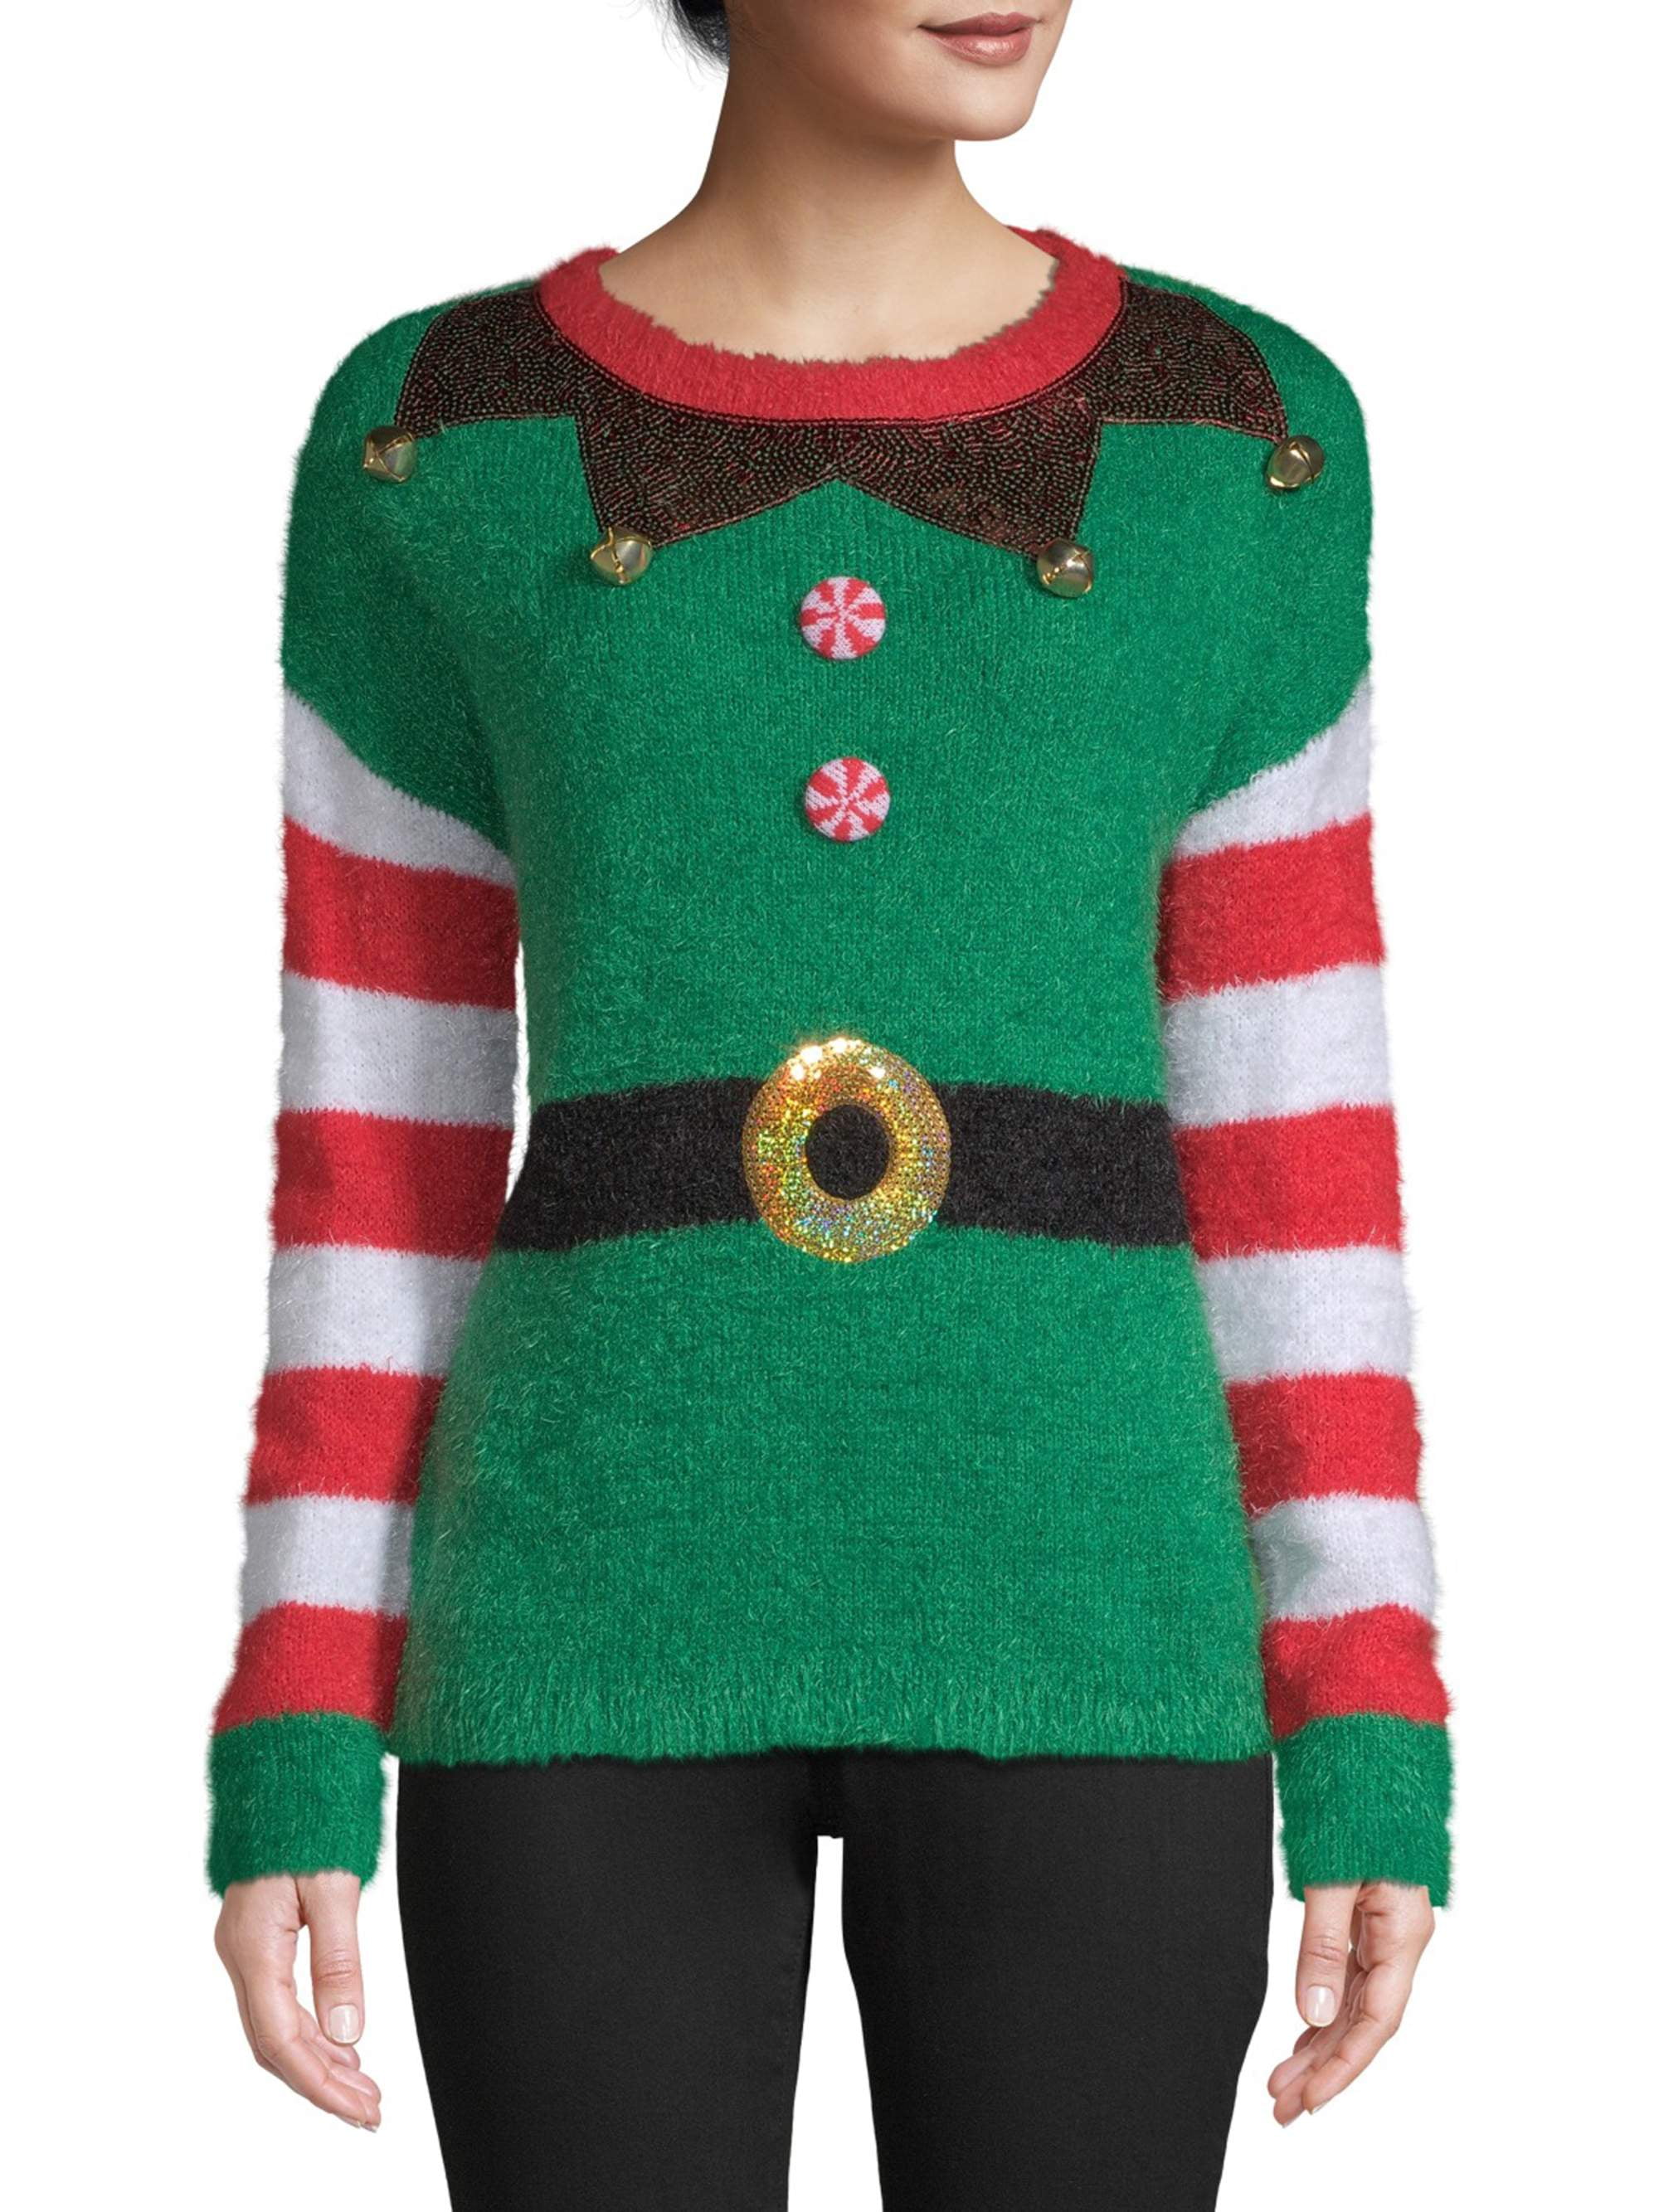 Tipsy Elves Youth Elf Ugly Christmas Sweater Cute Christmas Sweater for Child